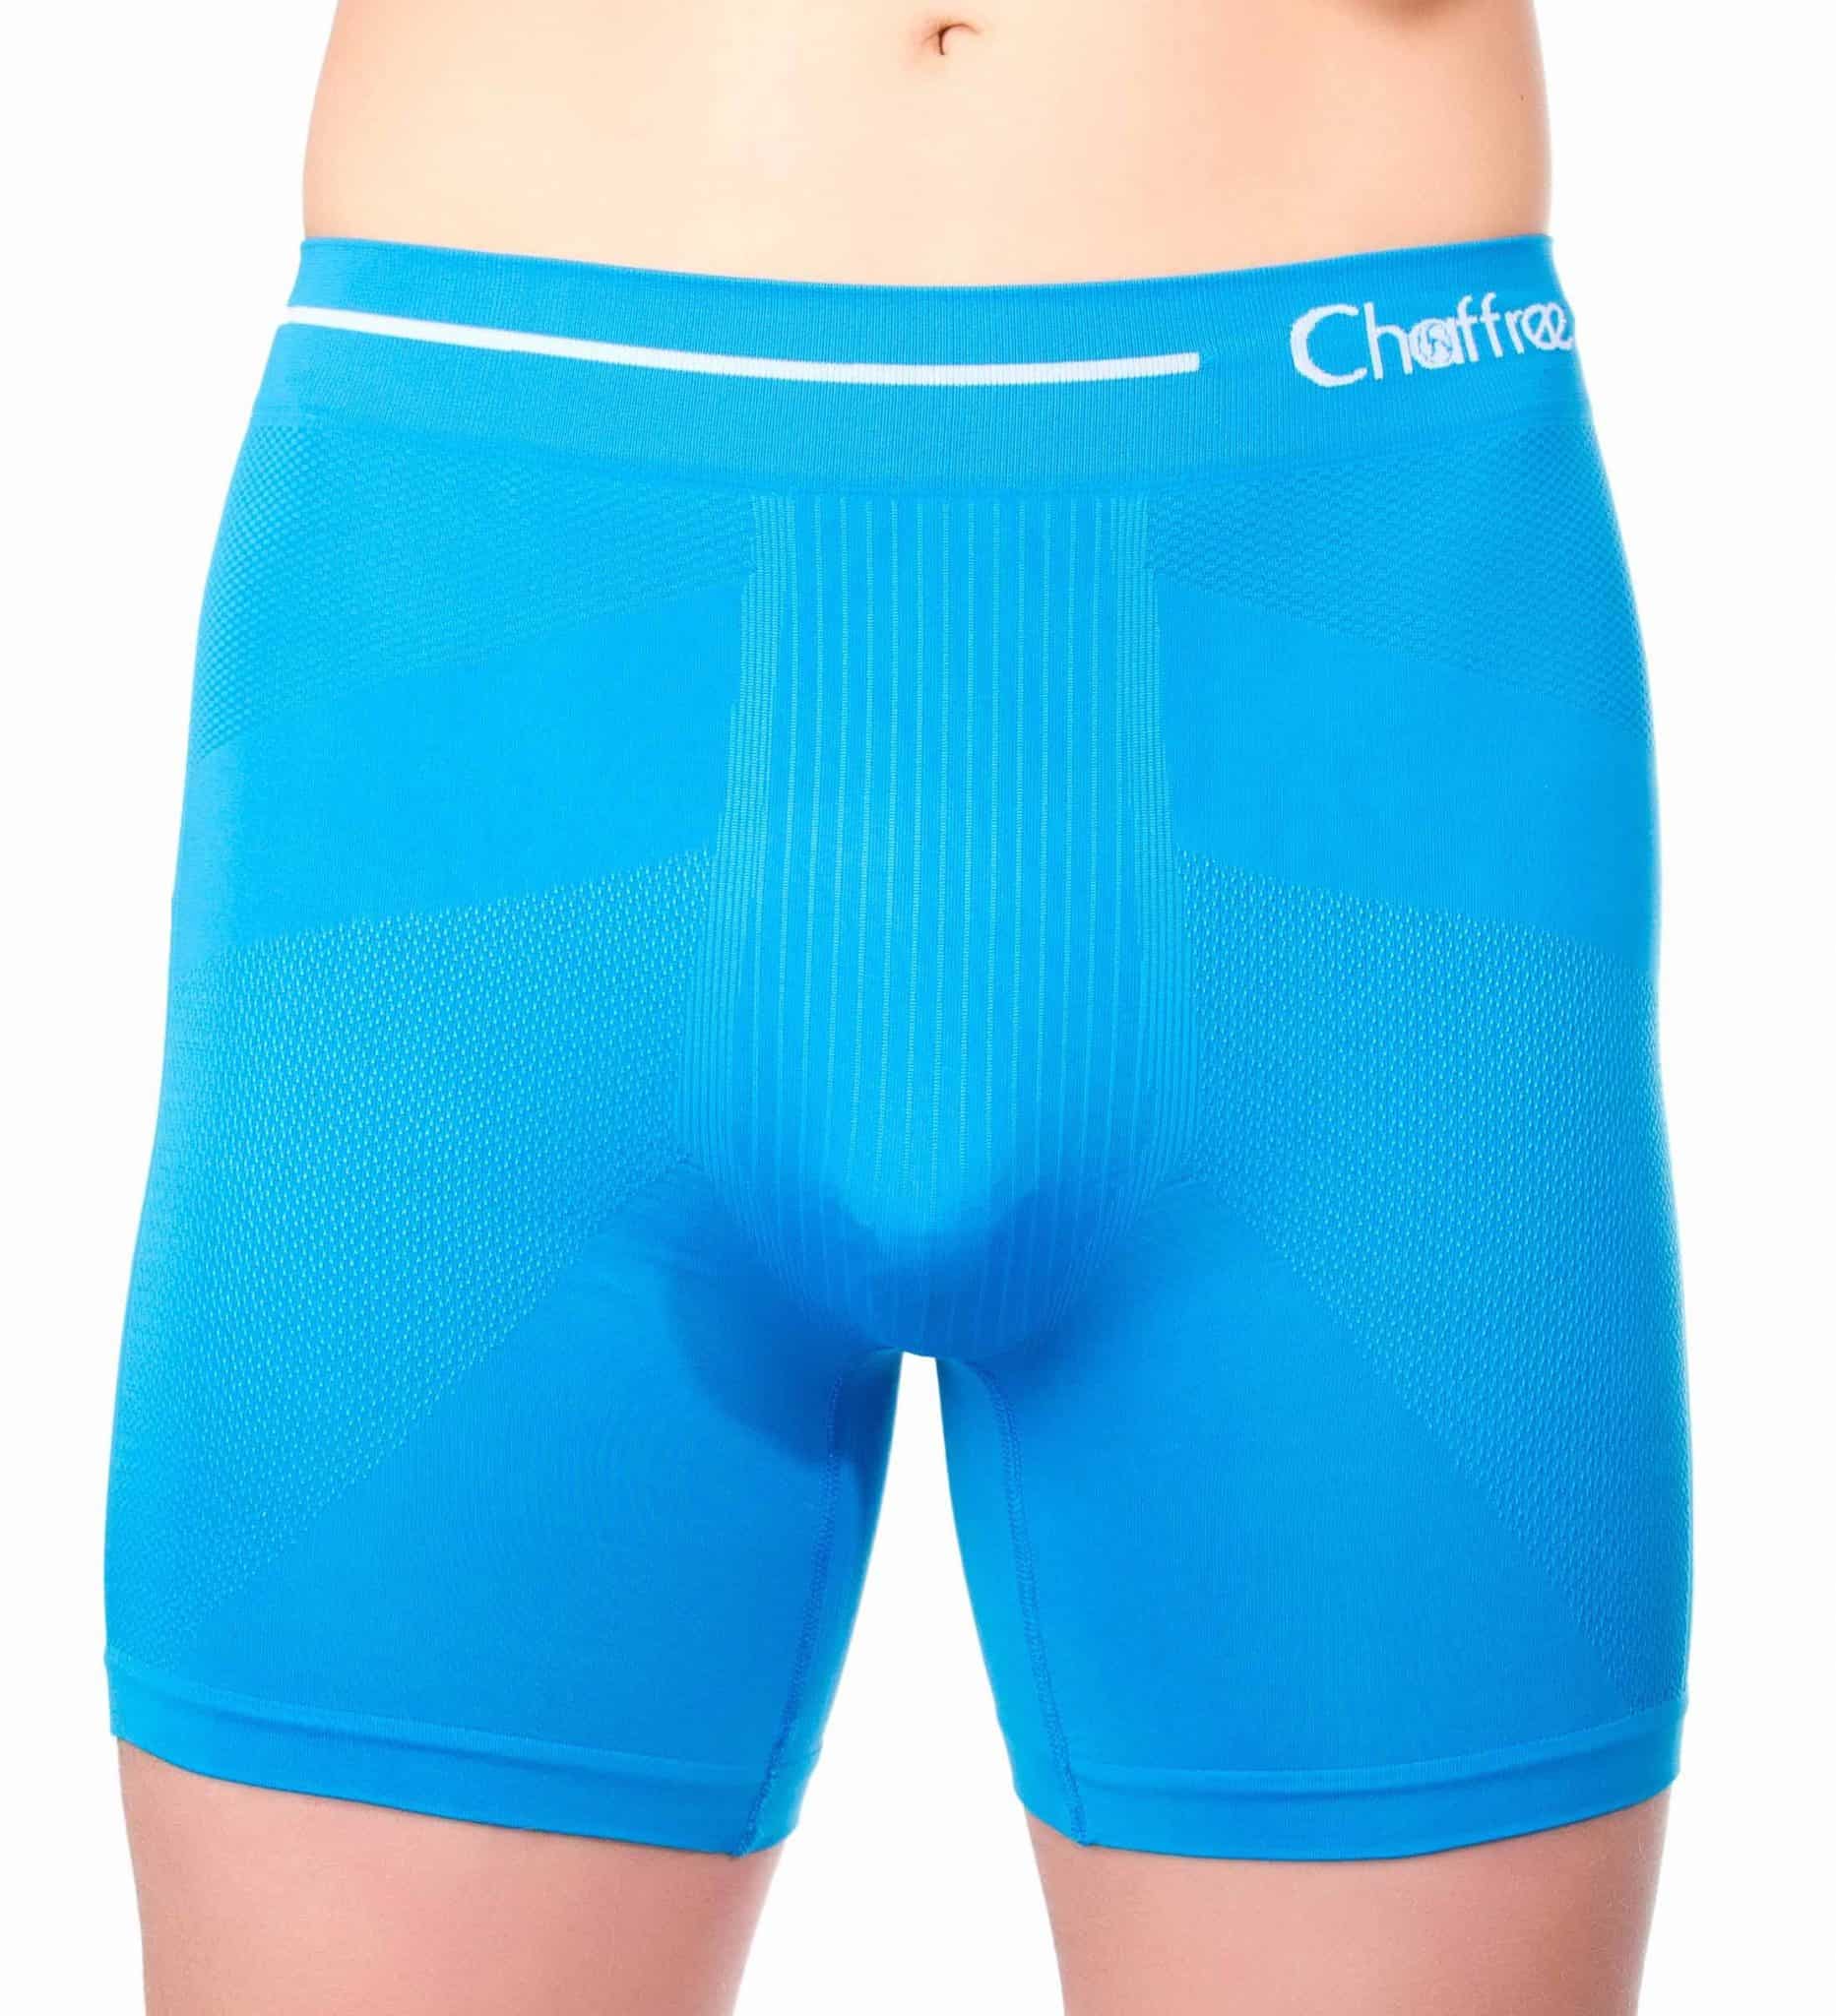 Moisture Wicking Sweat and Chafing Control Chaffree Mens Briefs Underpants Traditional High Waist Ultra Comfortable Pants Sports Gym Exercise Underwear 5 Pack Short & Long Leg Stretchy Seamless